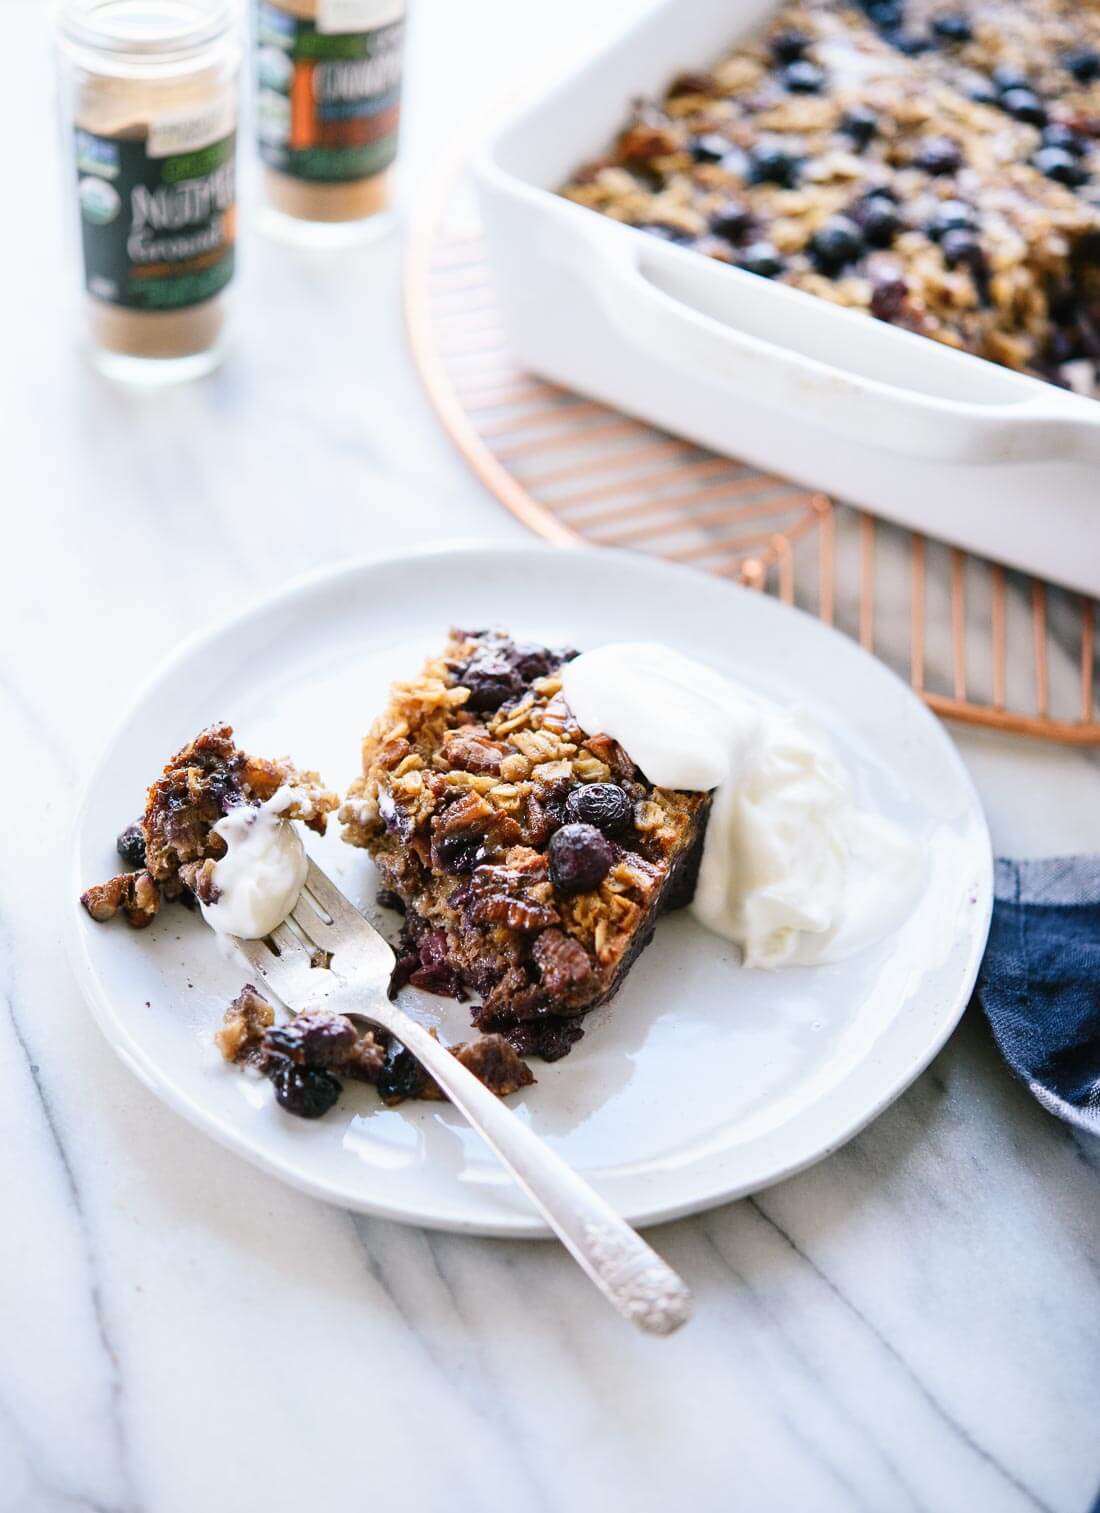 Delicious blueberry baked oatmeal recipe - cookieandkate.com